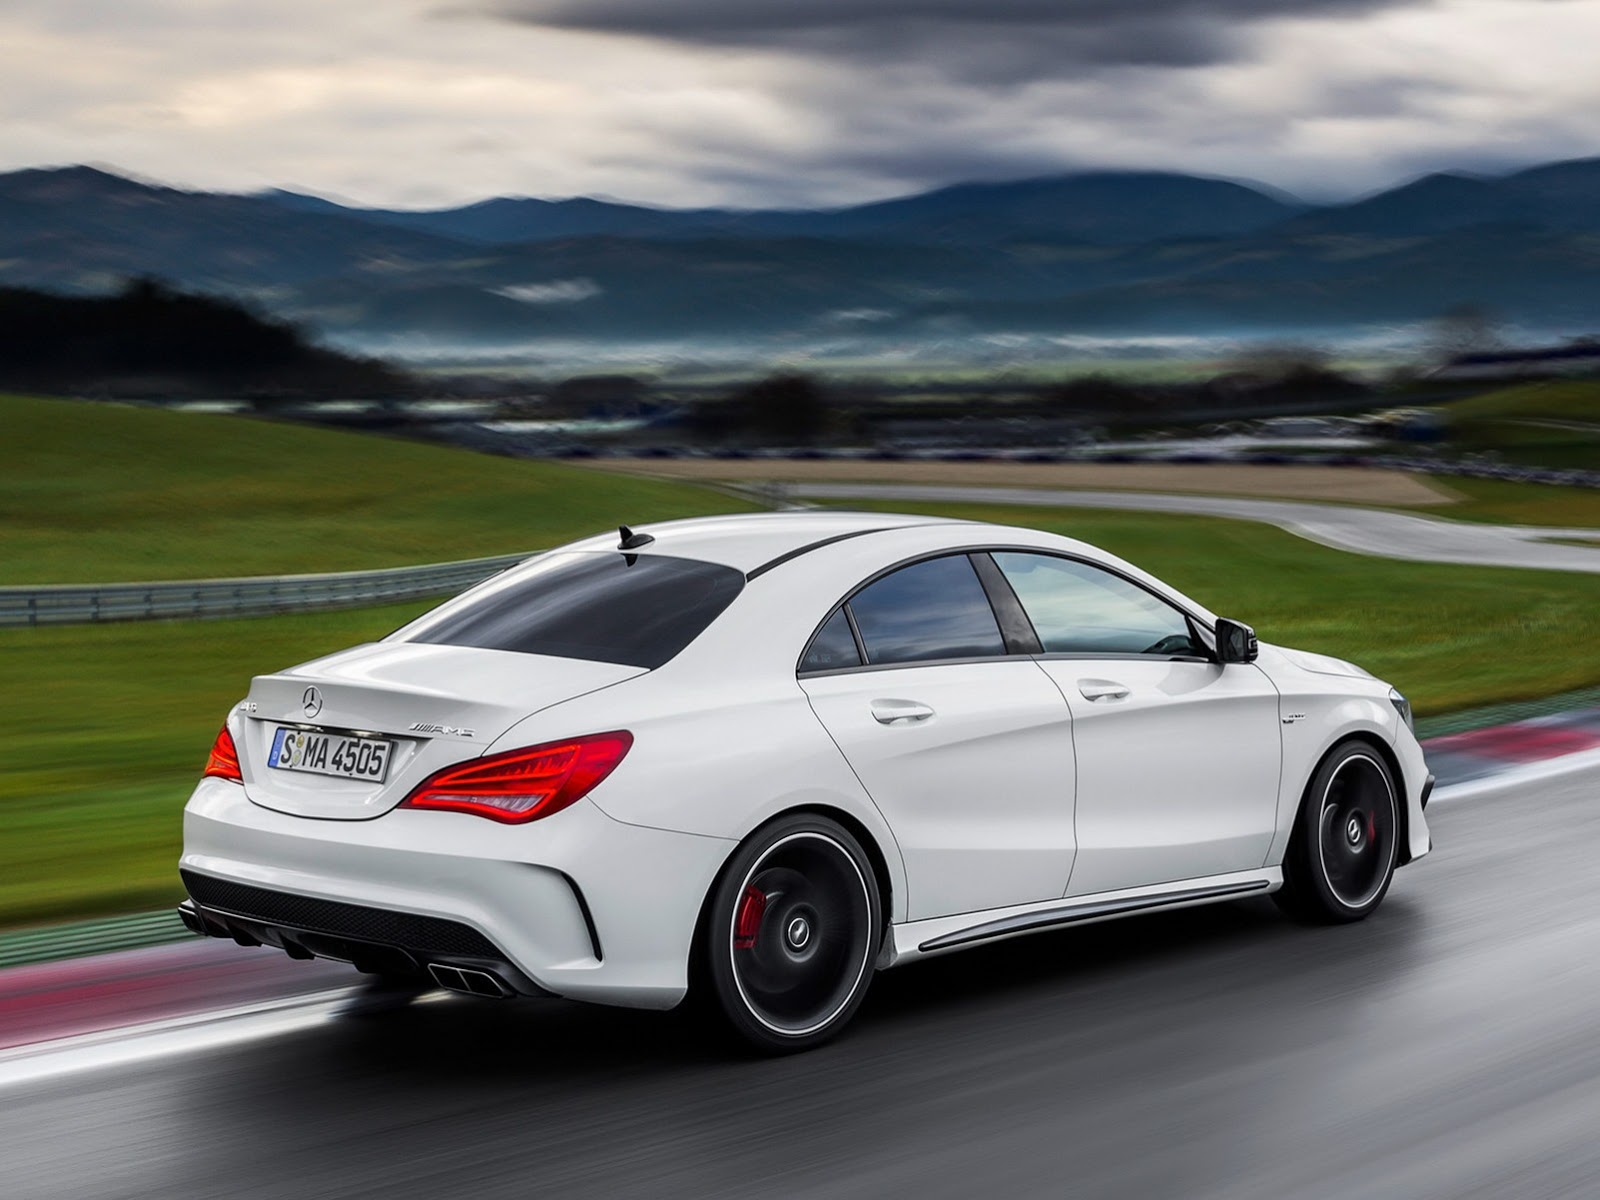 2014 Mercedes CLA 45 AMG First Photos Leaked